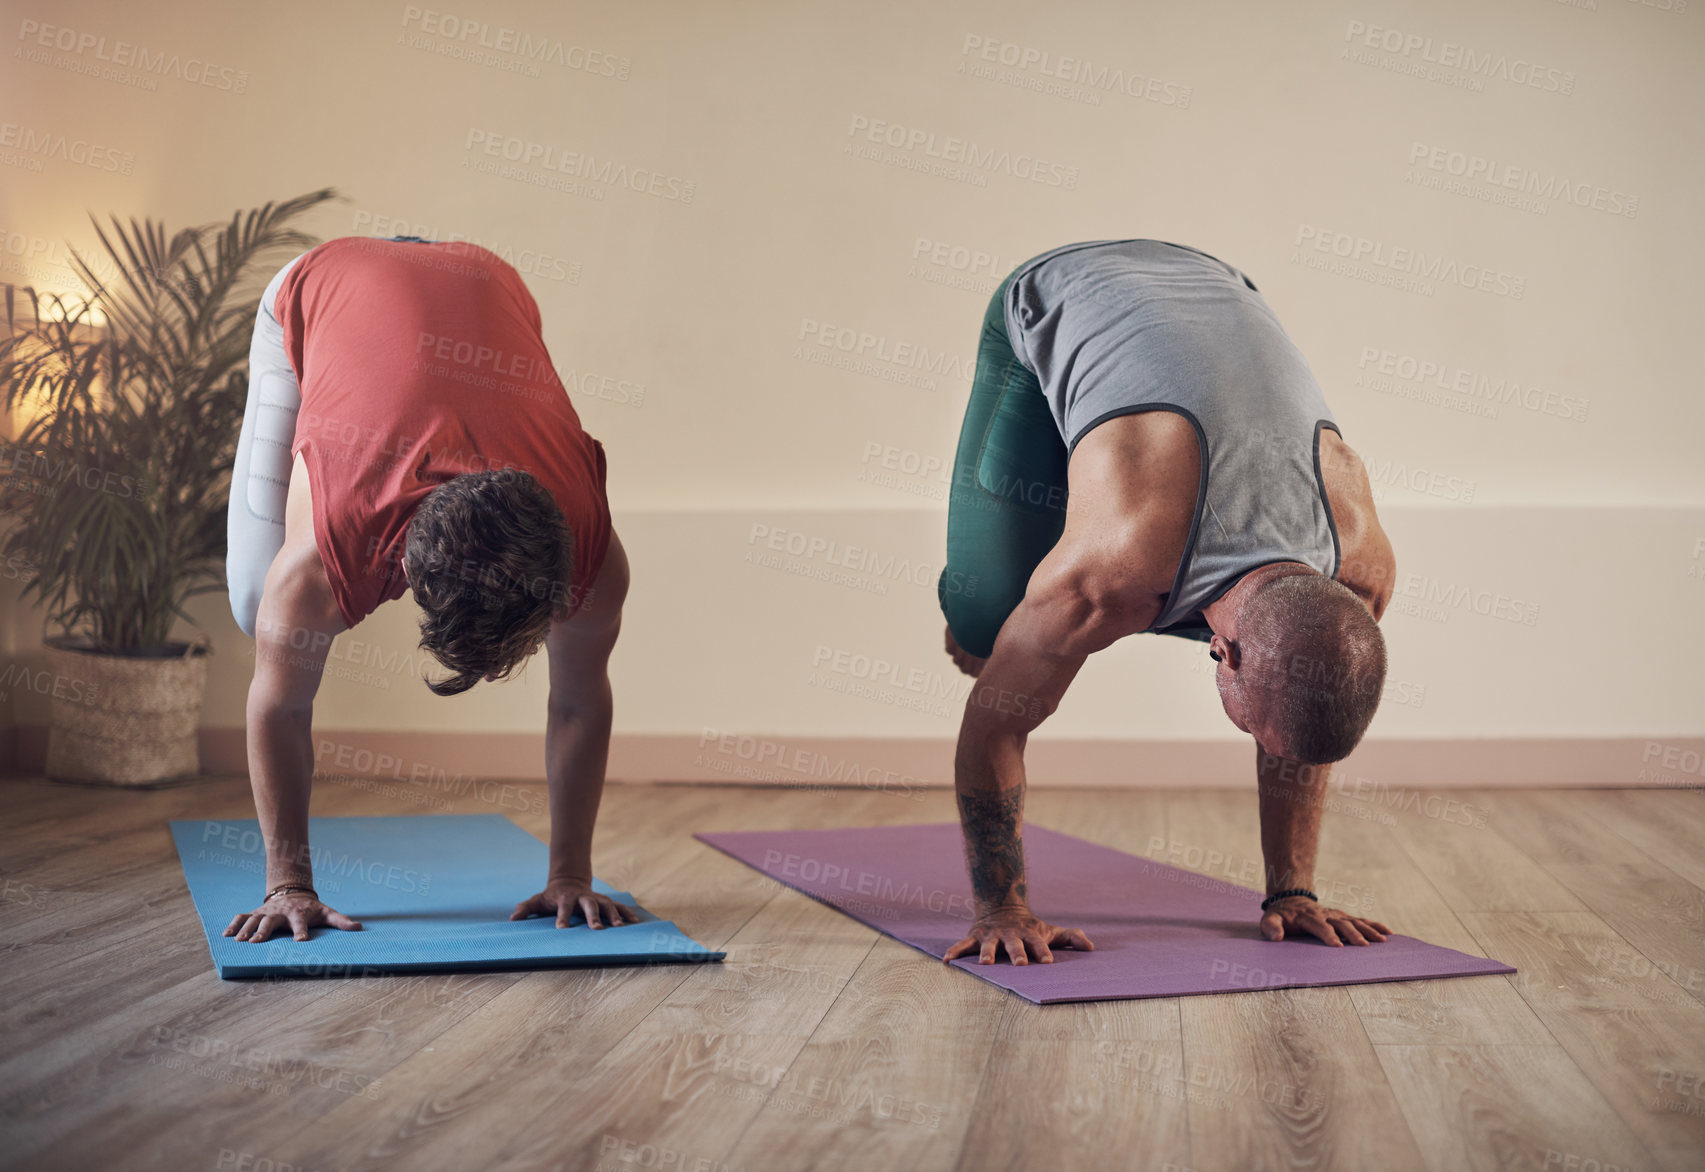 Buy stock photo Full length shot of two unrecognizable men holding a crane pose during an indoor yoga session together